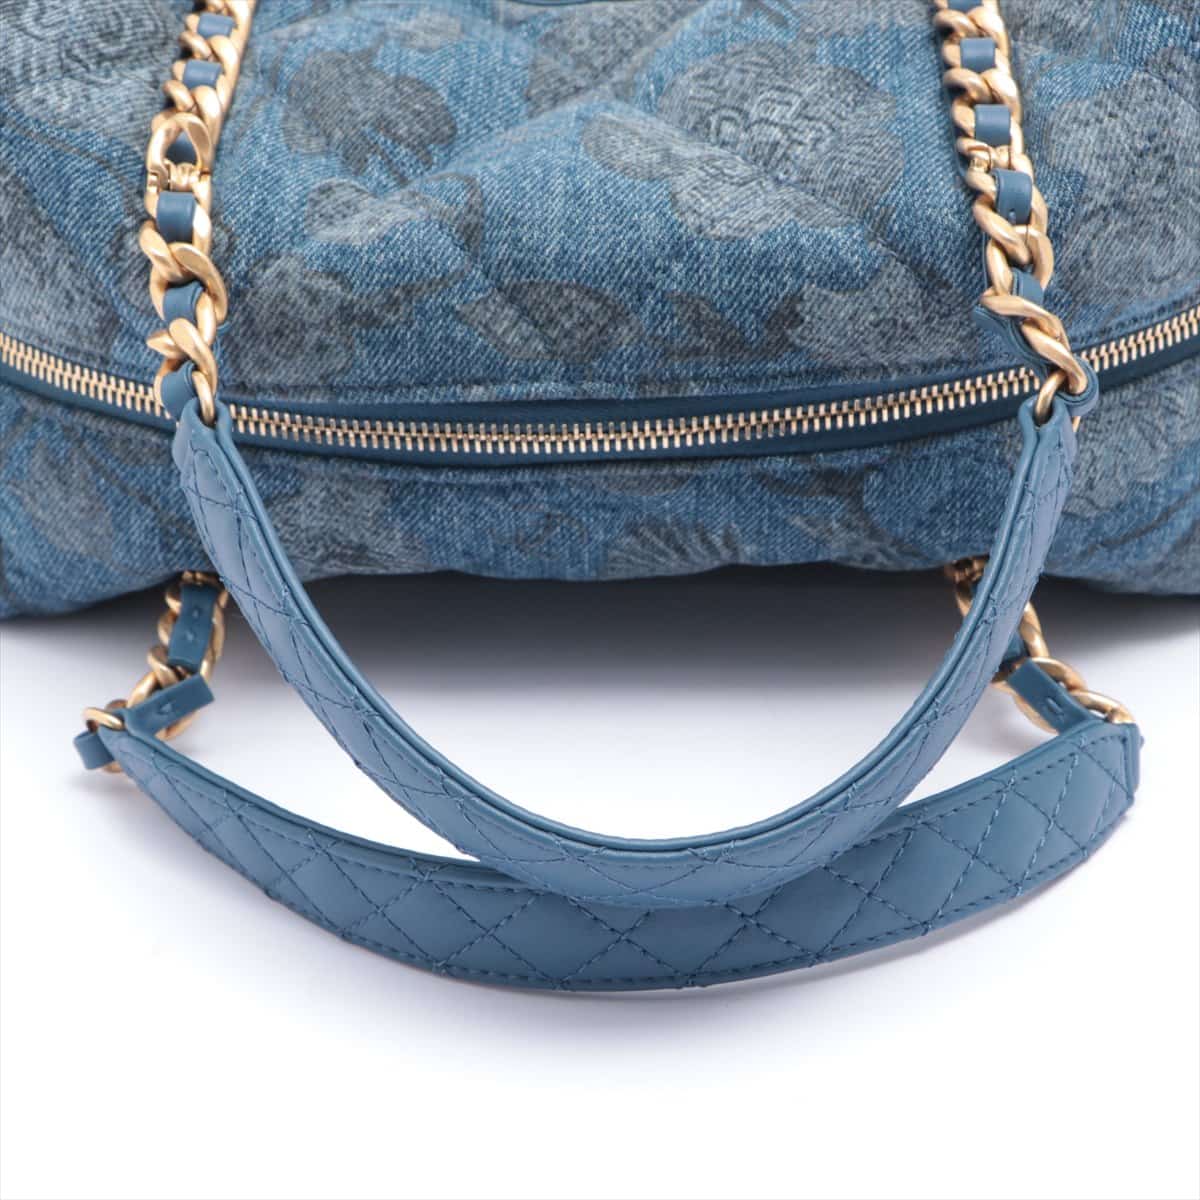 Chanel Matelasse Denim 2way handbag Blue Champagne gold hardware There is an IC chip